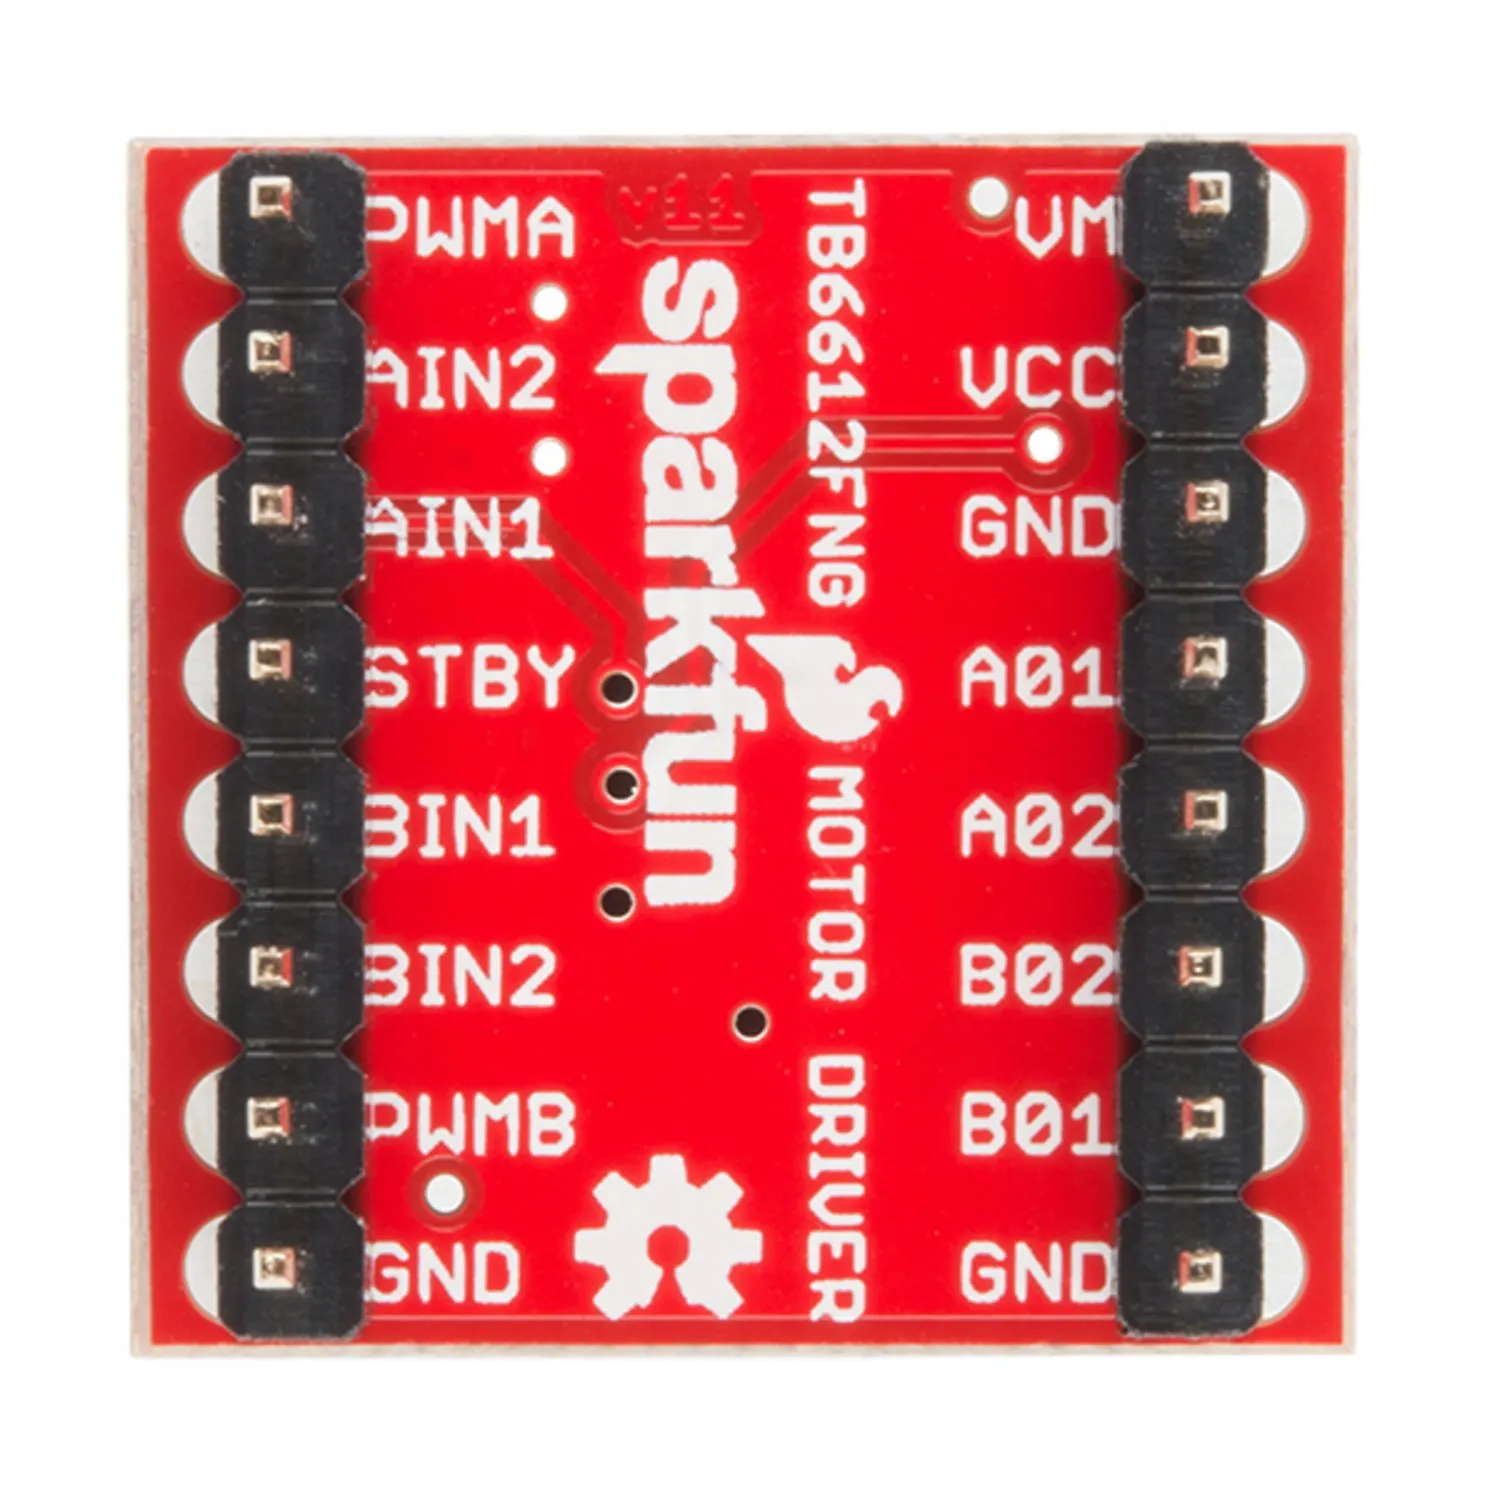 Photo of SparkFun Motor Driver - Dual TB6612FNG (with Headers)